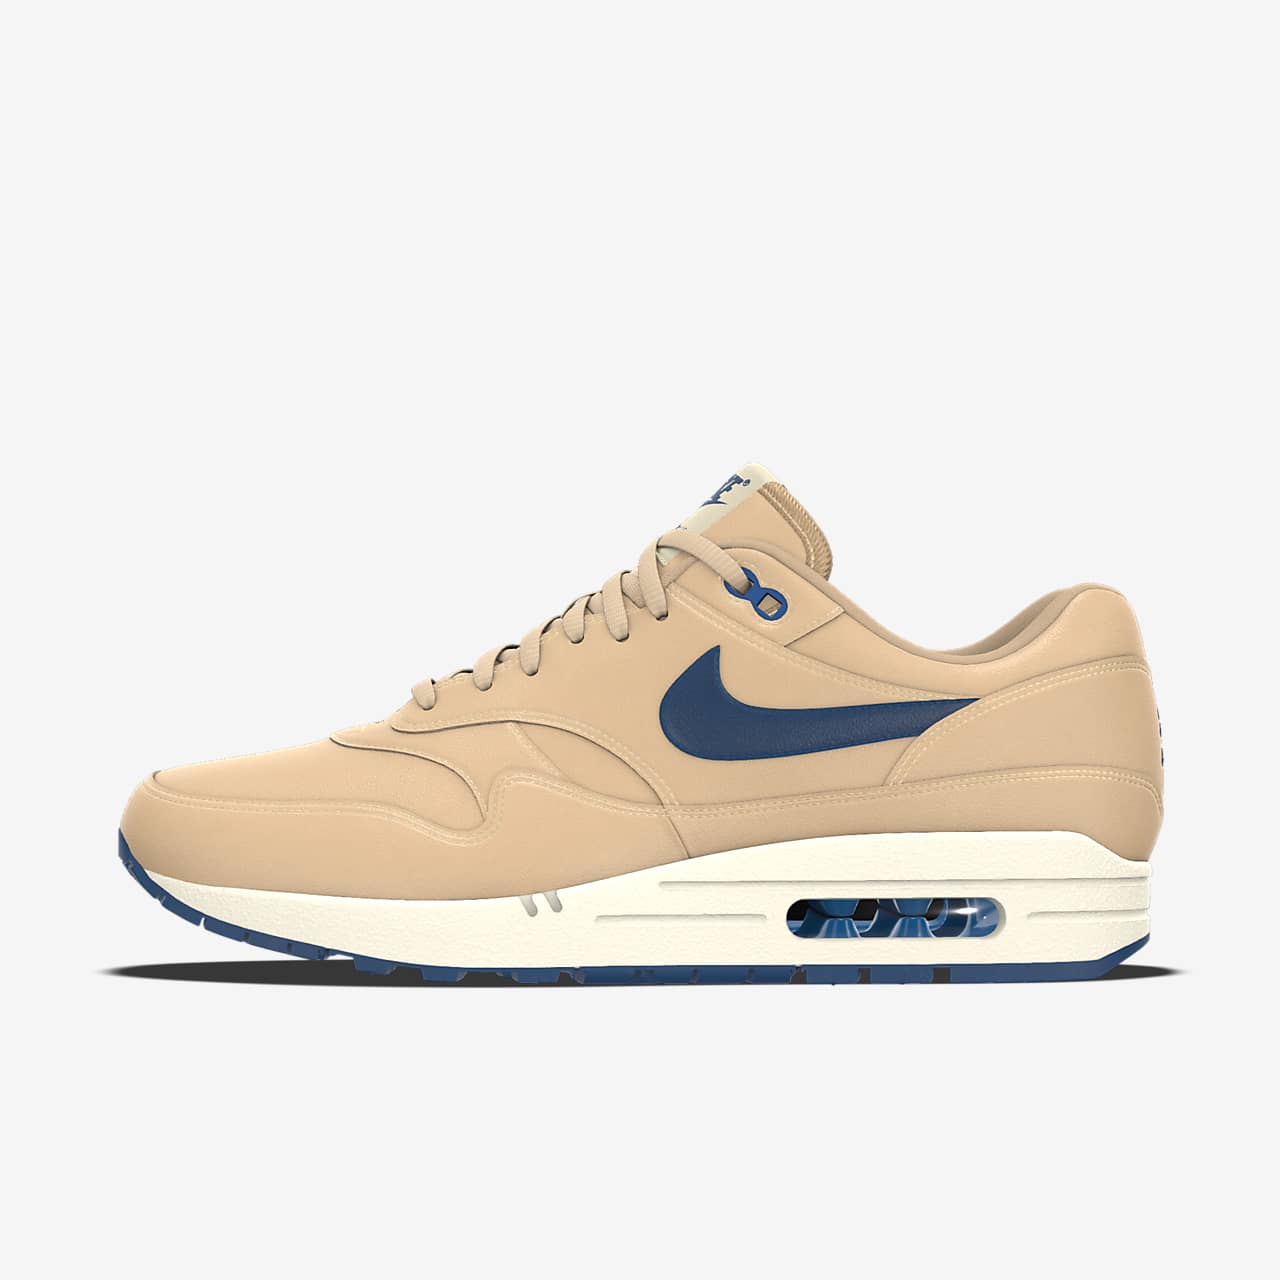 Chaussure personnalisable Nike Air Max 1 By You